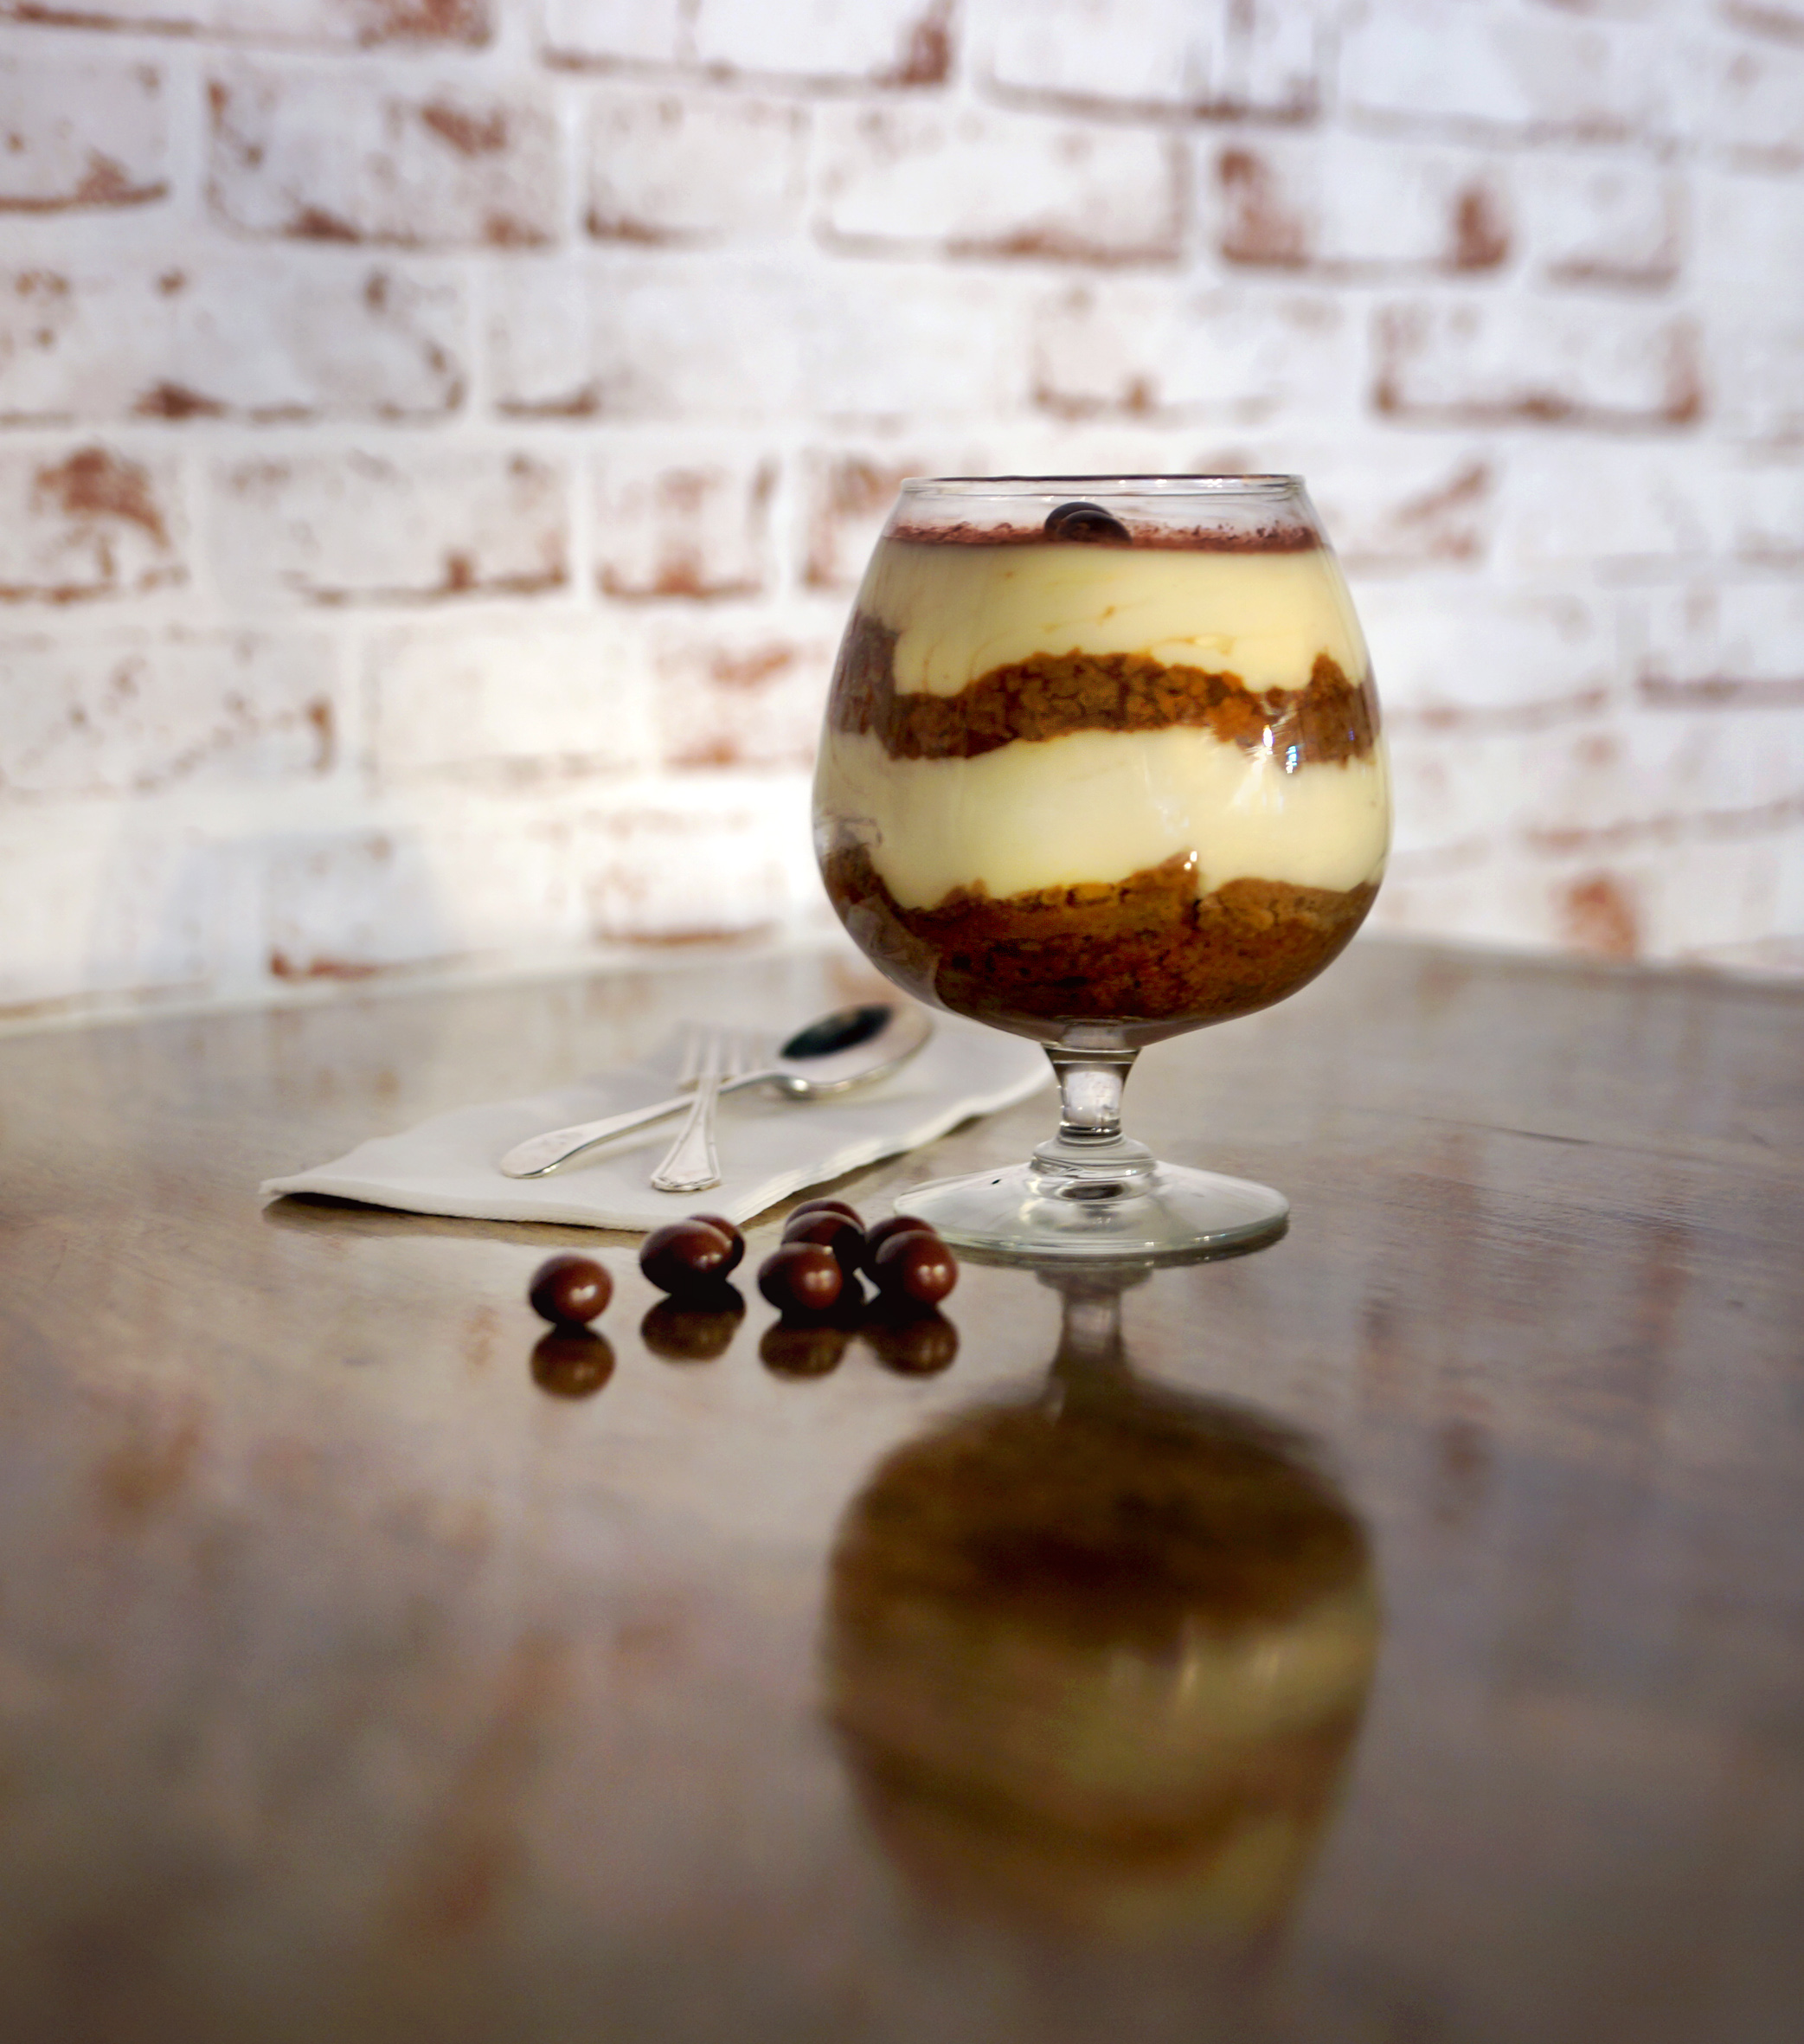 Tiramisu on a wood table with brick wall in the background